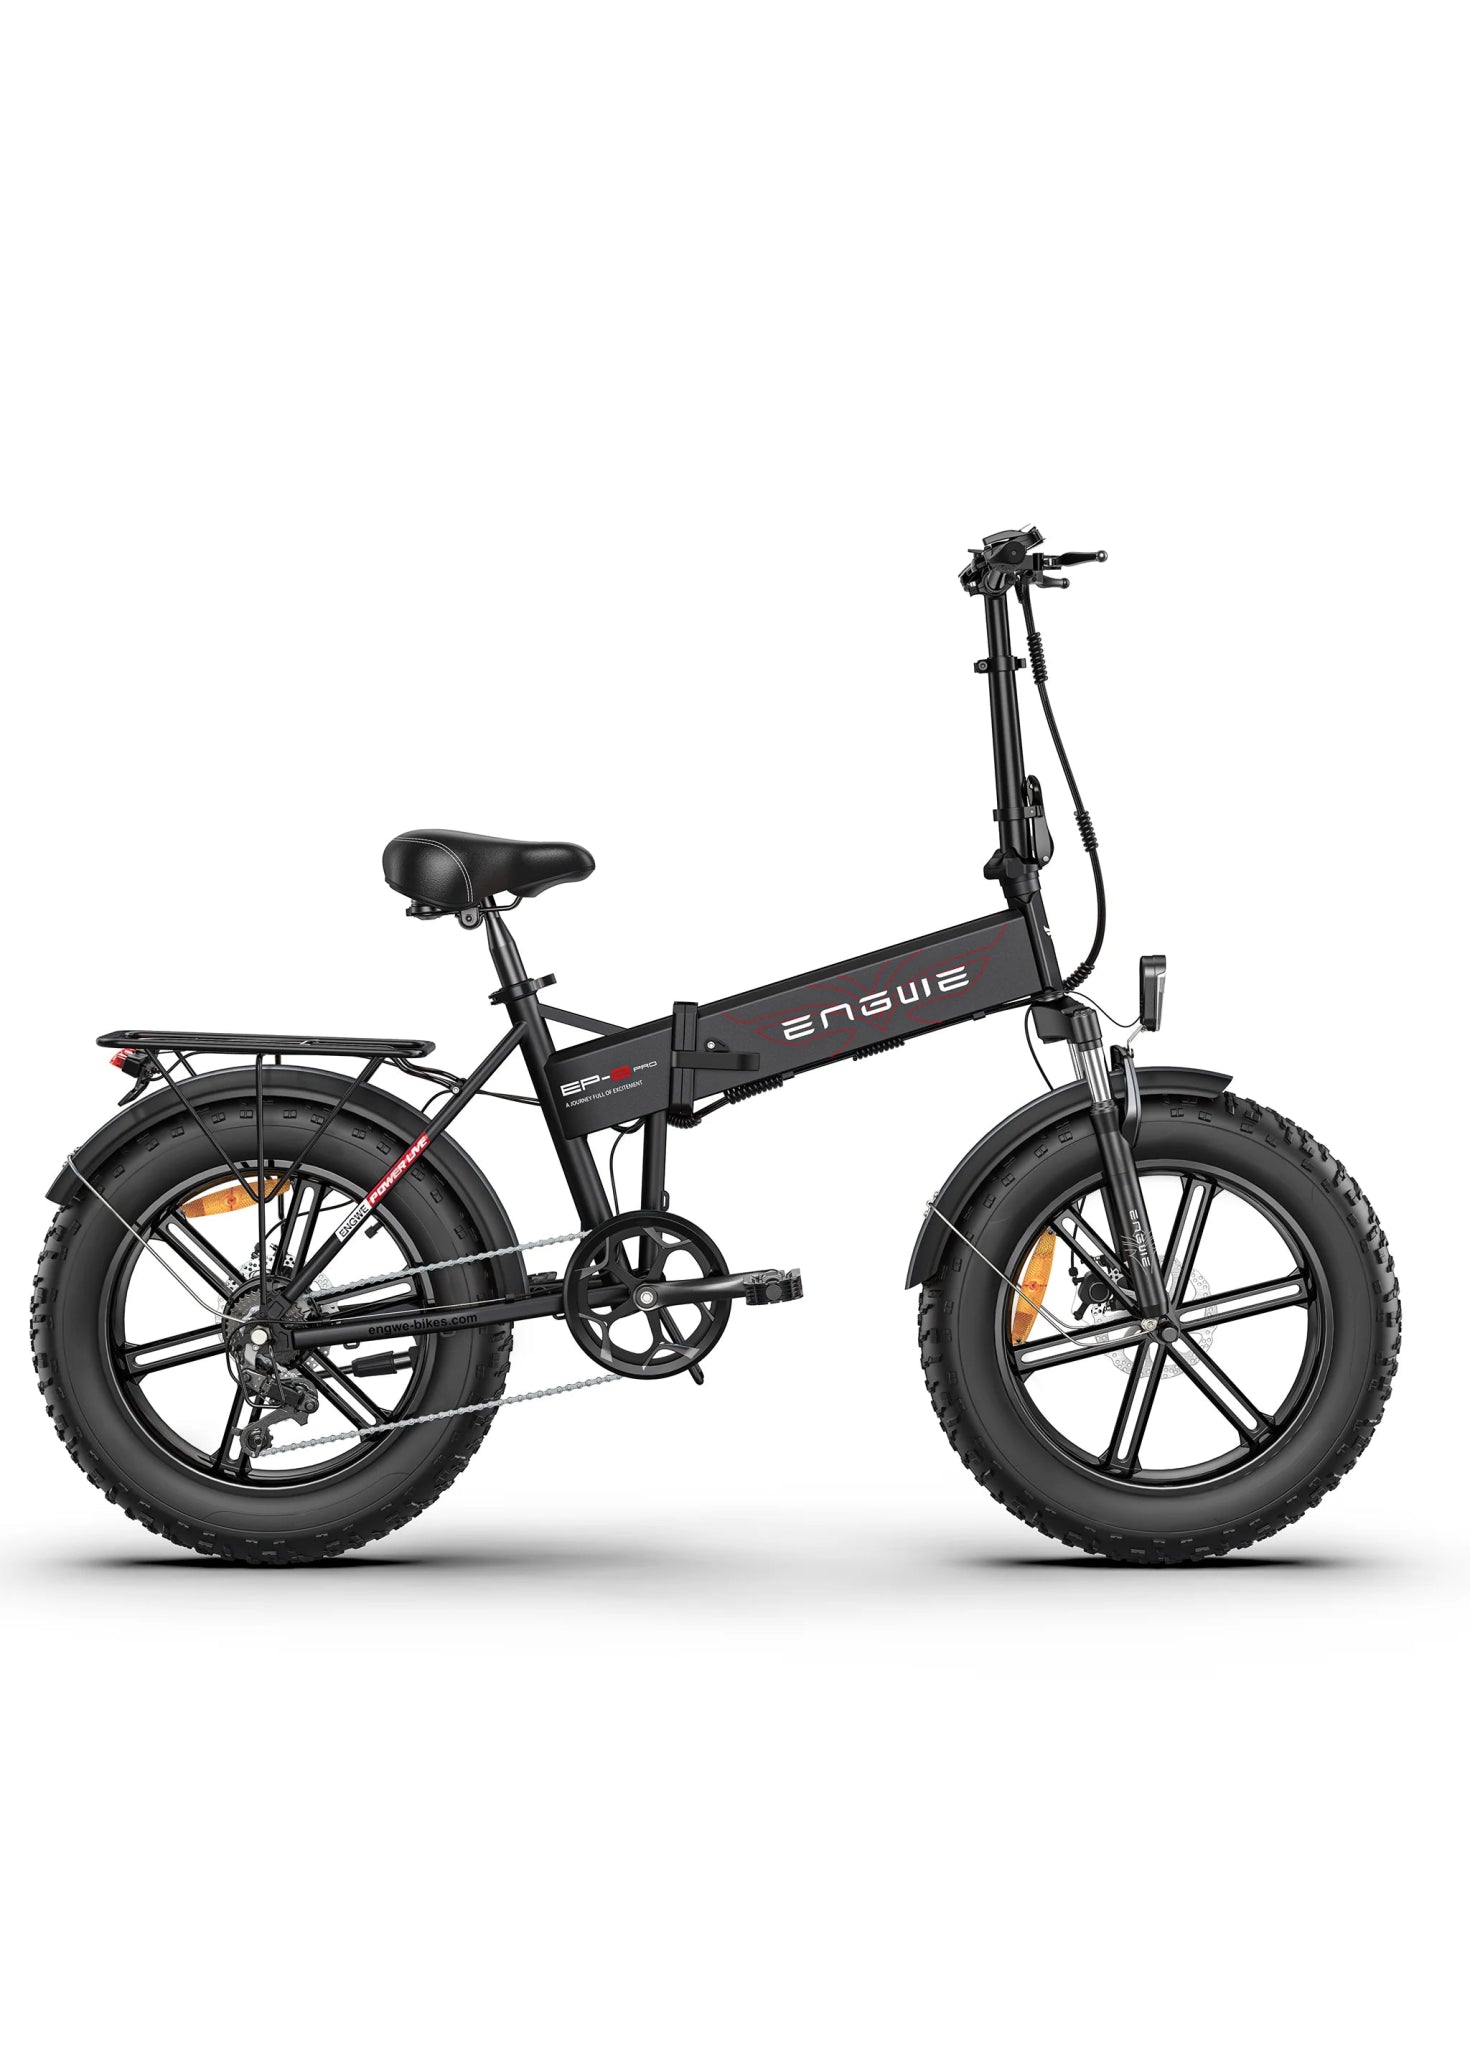 Engwe EP-2 Pro Fatbike - VoltFiets - Engwe